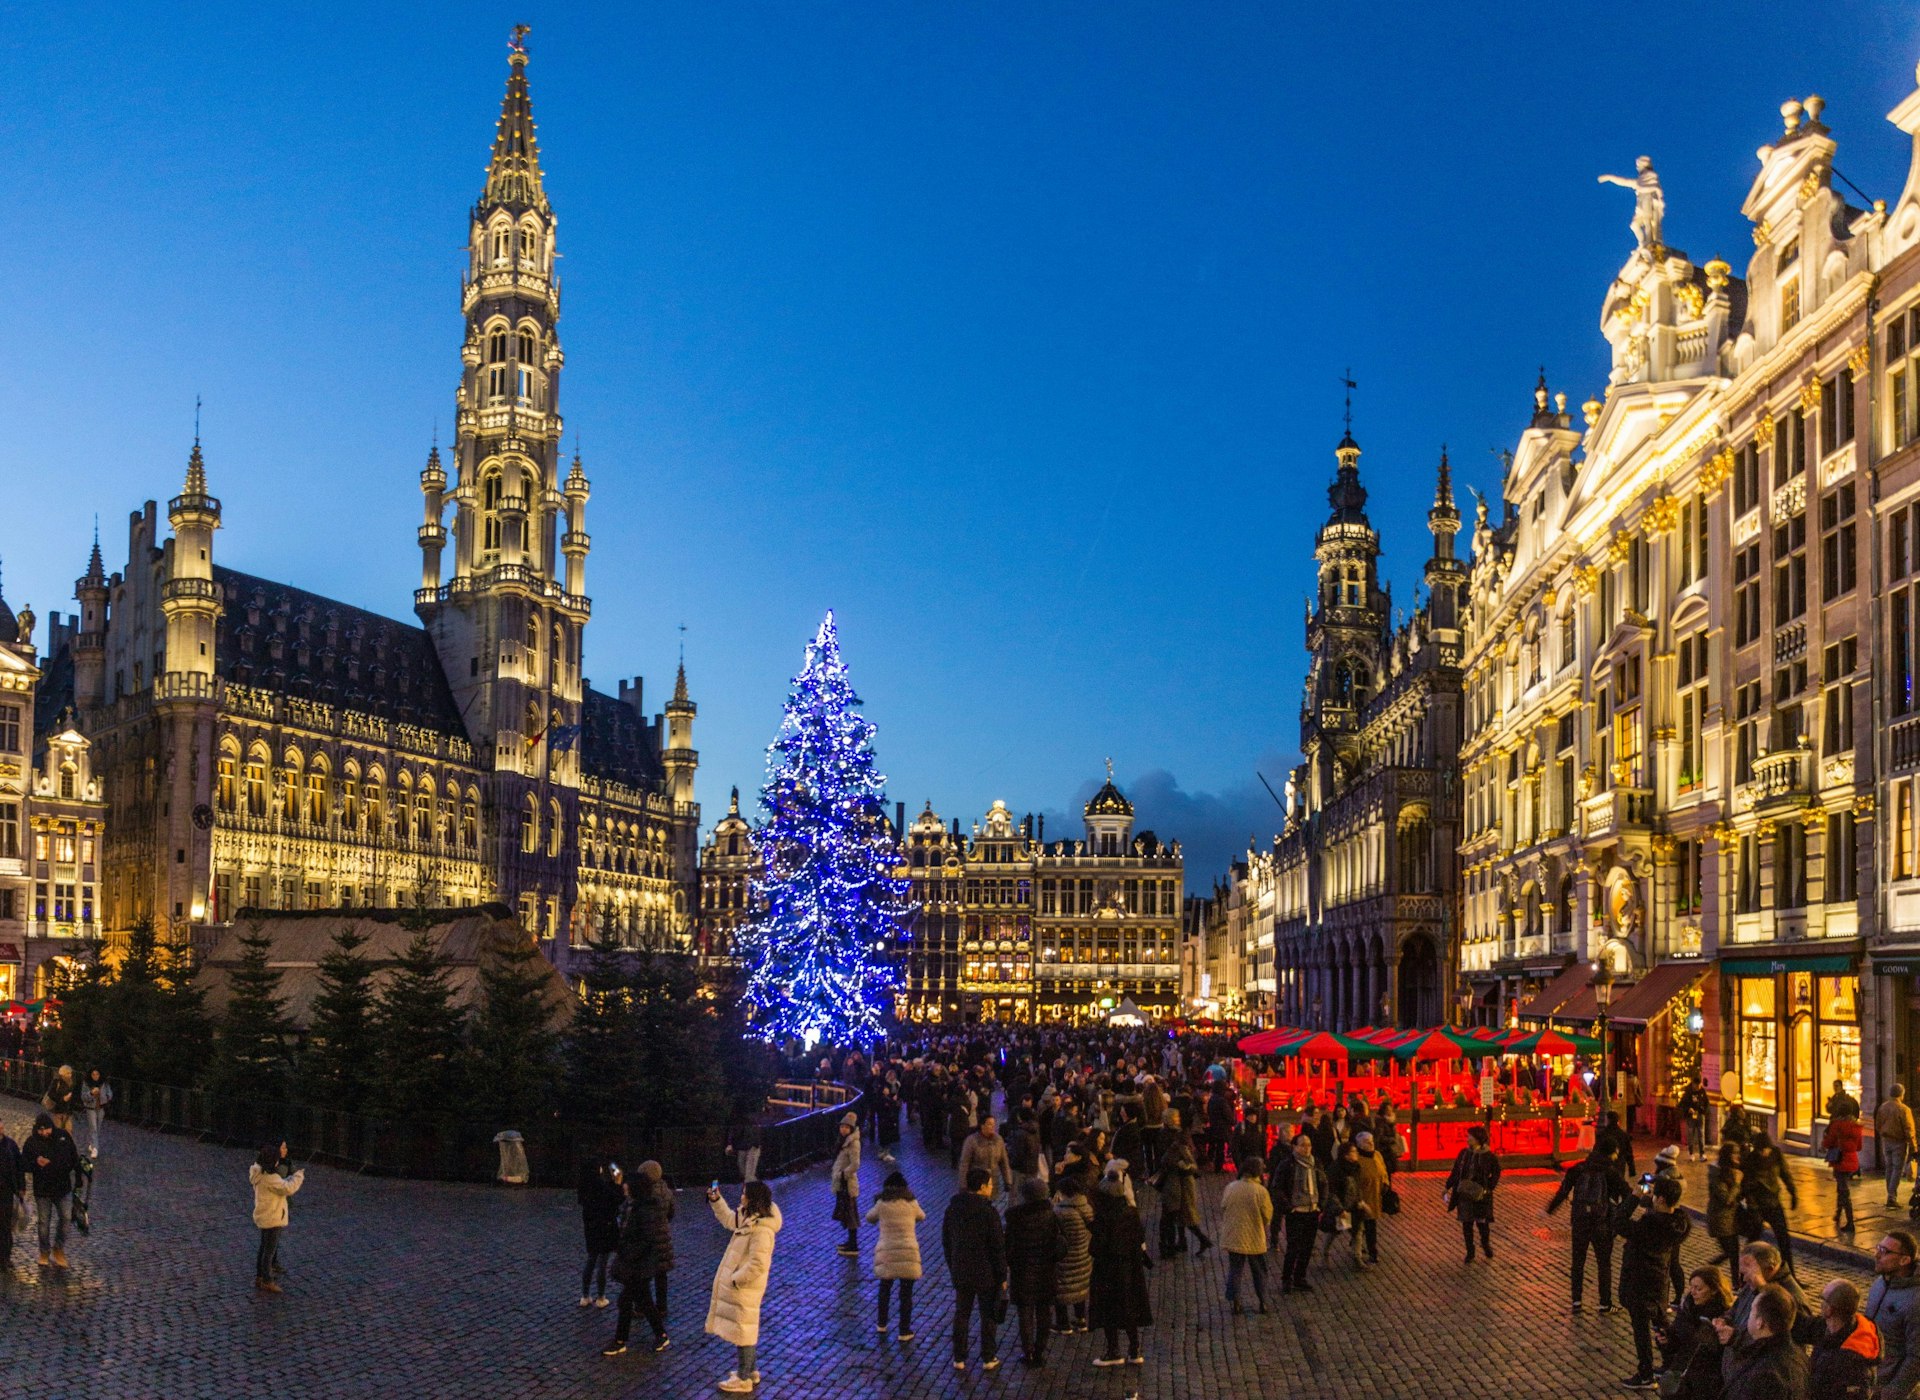 A lit Christmas tree stands in a busy city square